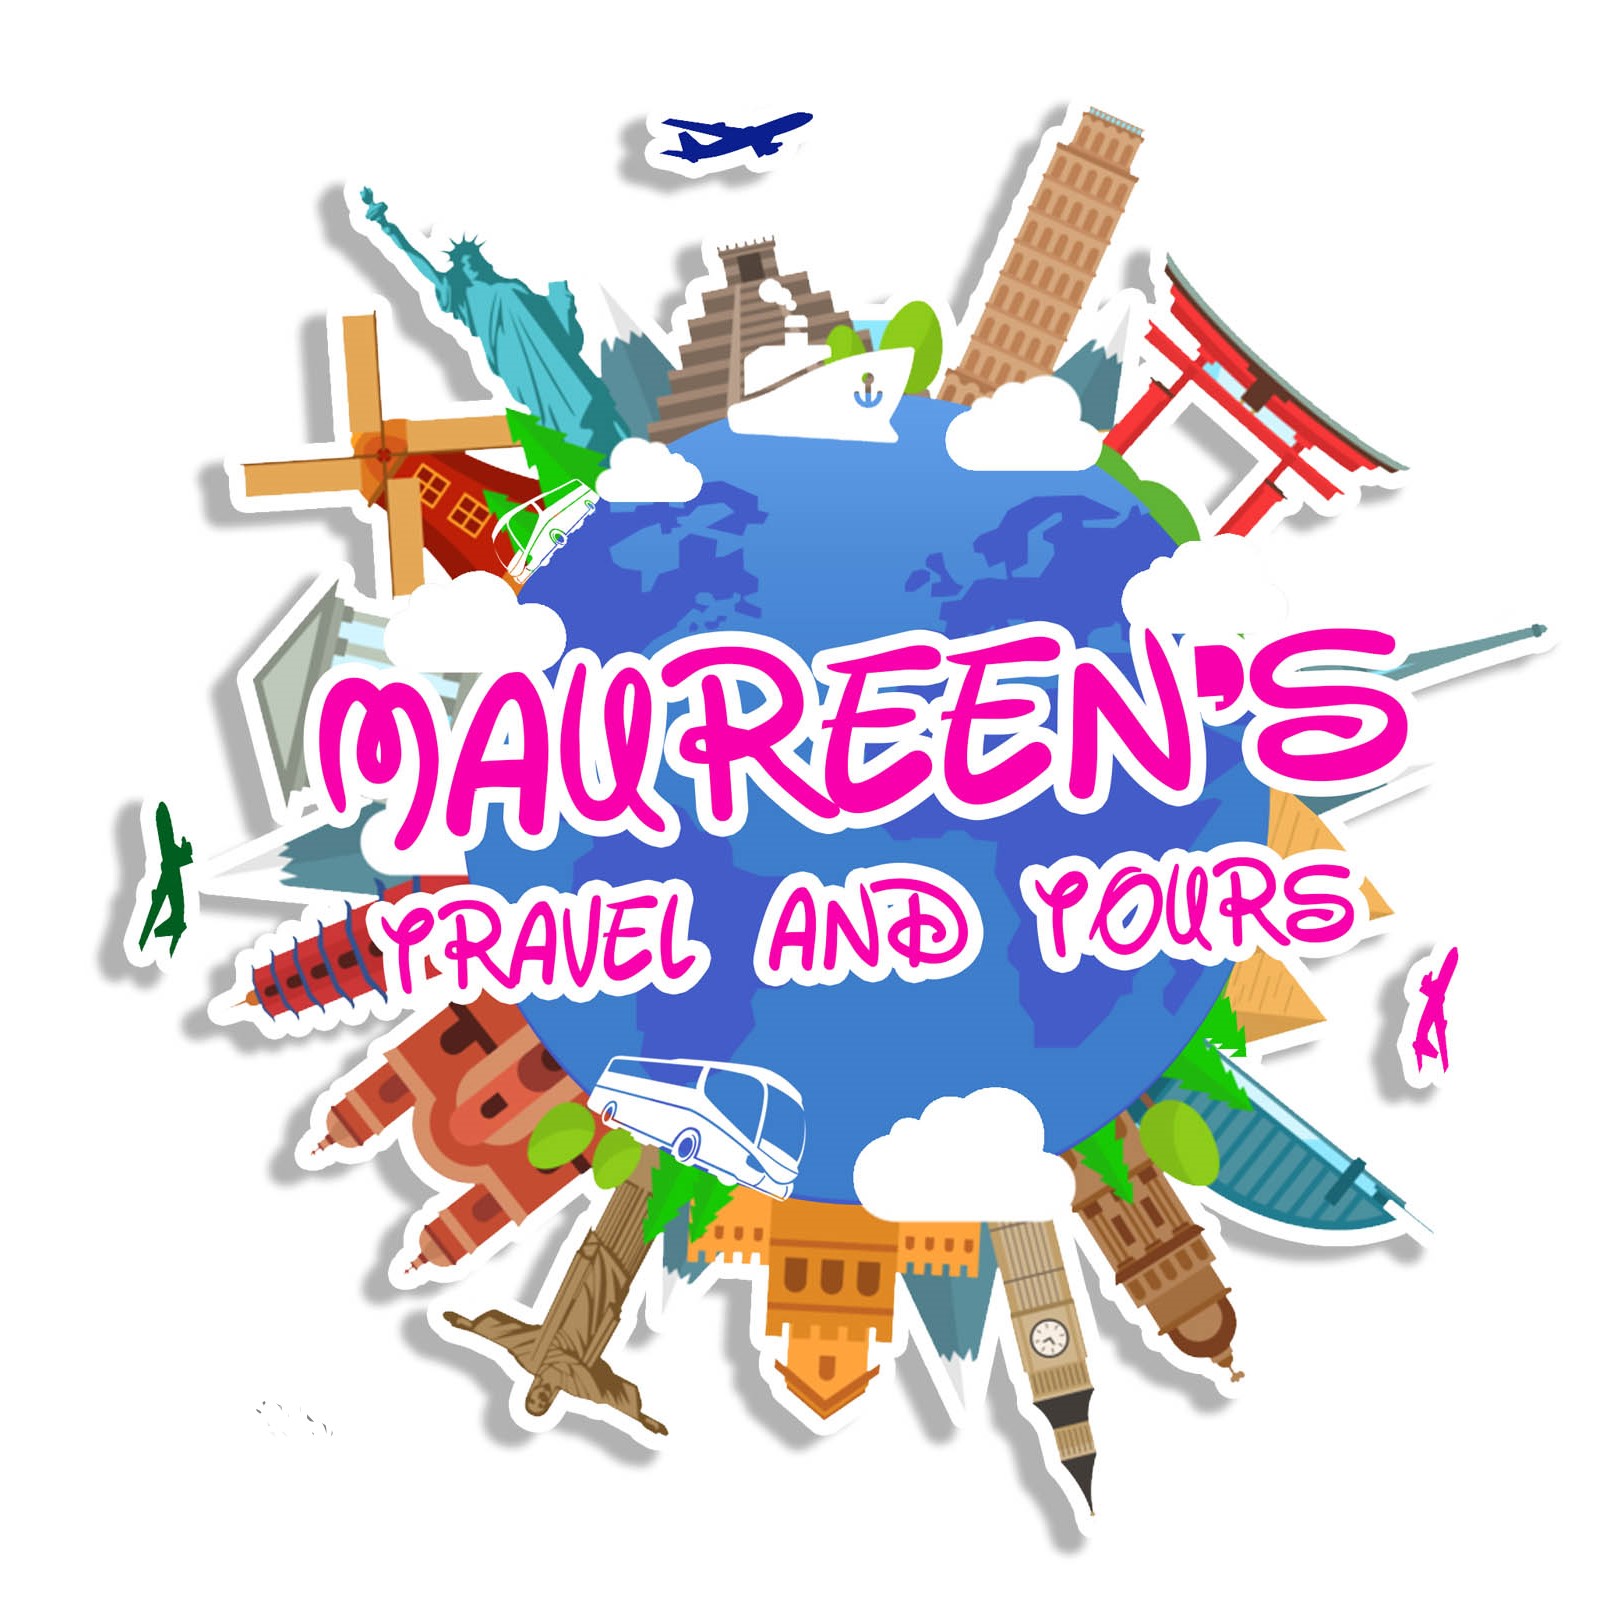 (BUYER) Maureen's Travel and Tours